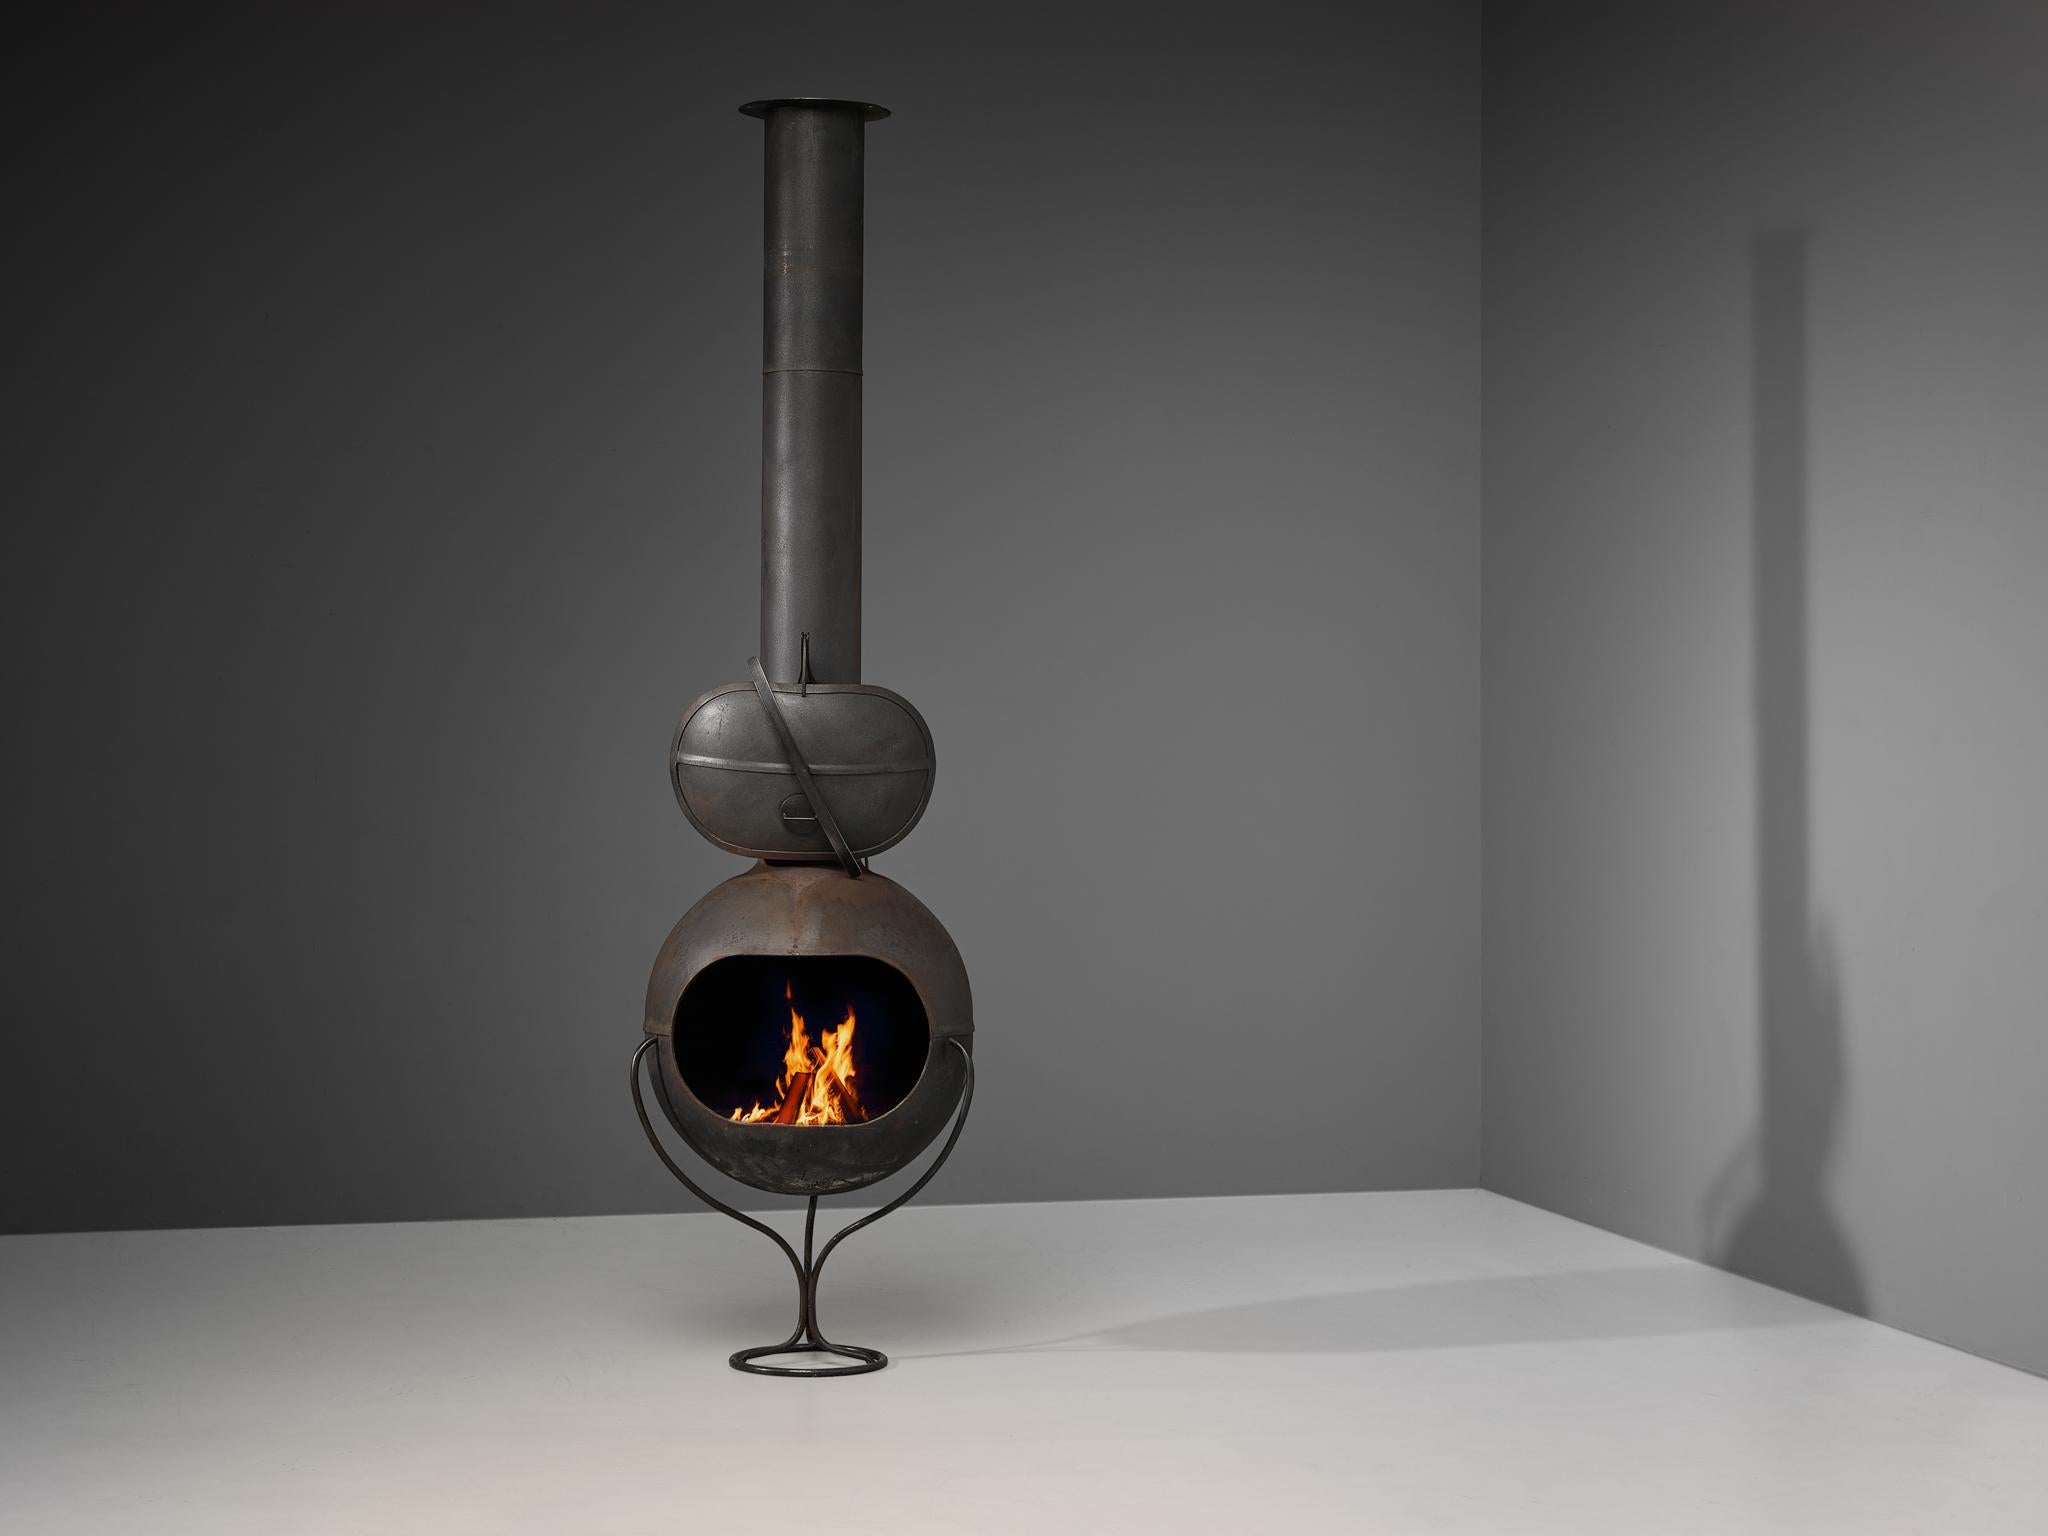 Fire place, sheet steel, France, 1960s.

A well-designed fire place executed in black coated steel, ably employed as either the heart of a decor or its focal point. The whole construction is based on a sphere shape that can be opened with a steel